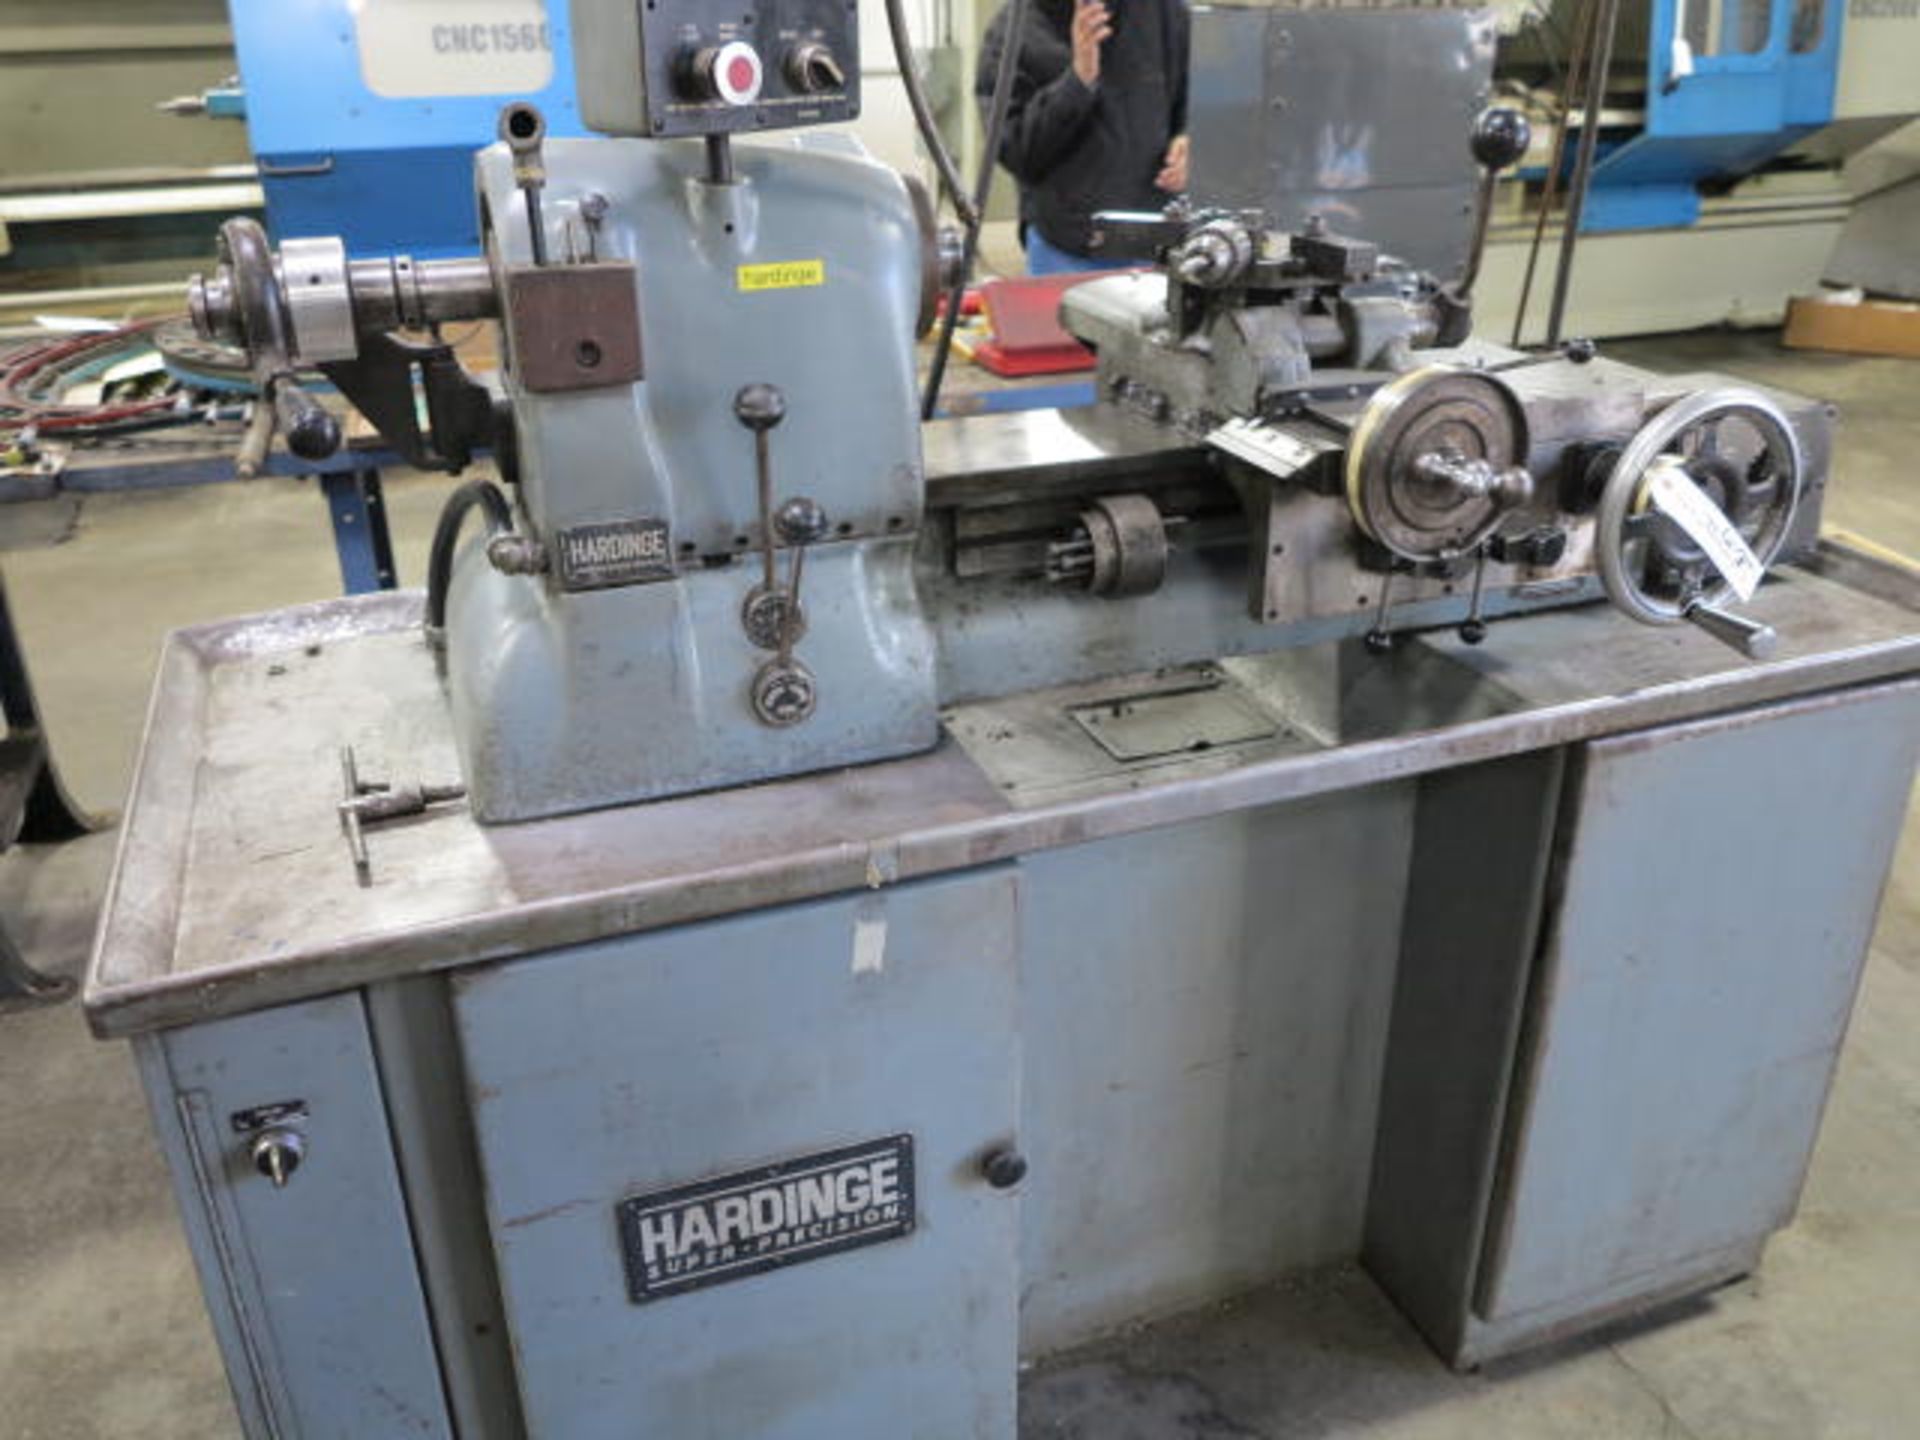 Hardinge Model HC Turret Lathe, Quick Release Draw Bar, Variable Speed Spindle, Variable Speed - Image 3 of 3